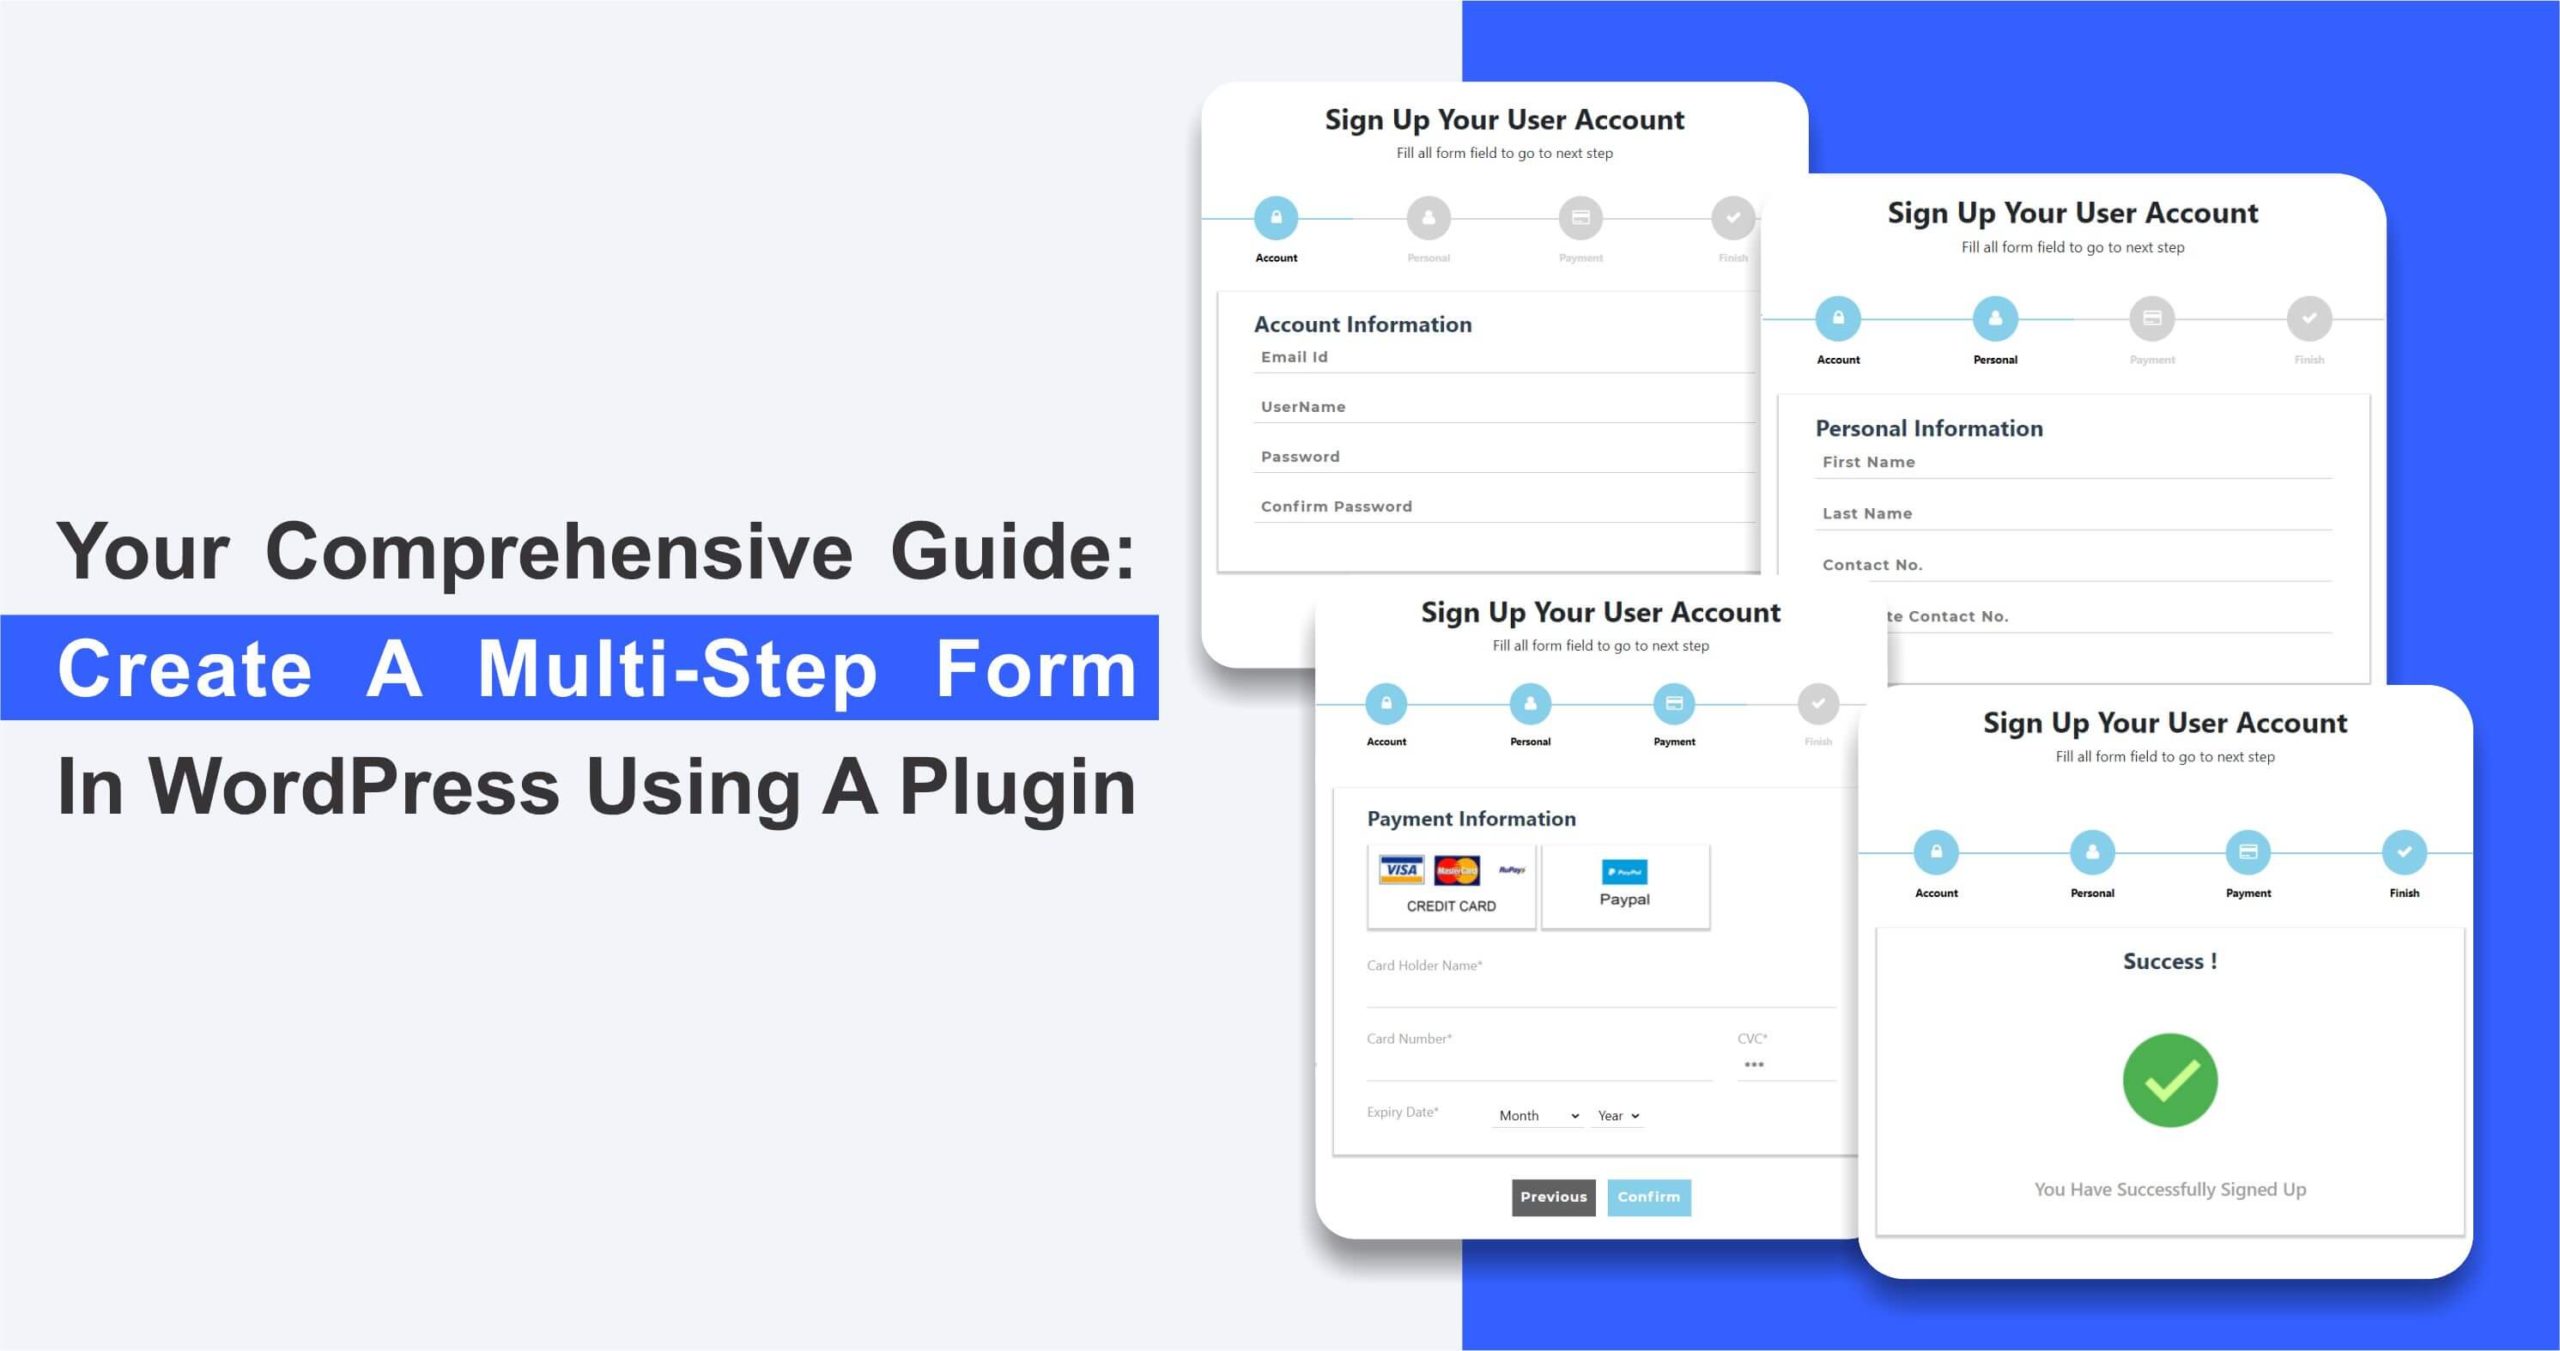 Your Comprehensive Guide to Create a Multi-Step Form in WordPress Using a Plugin